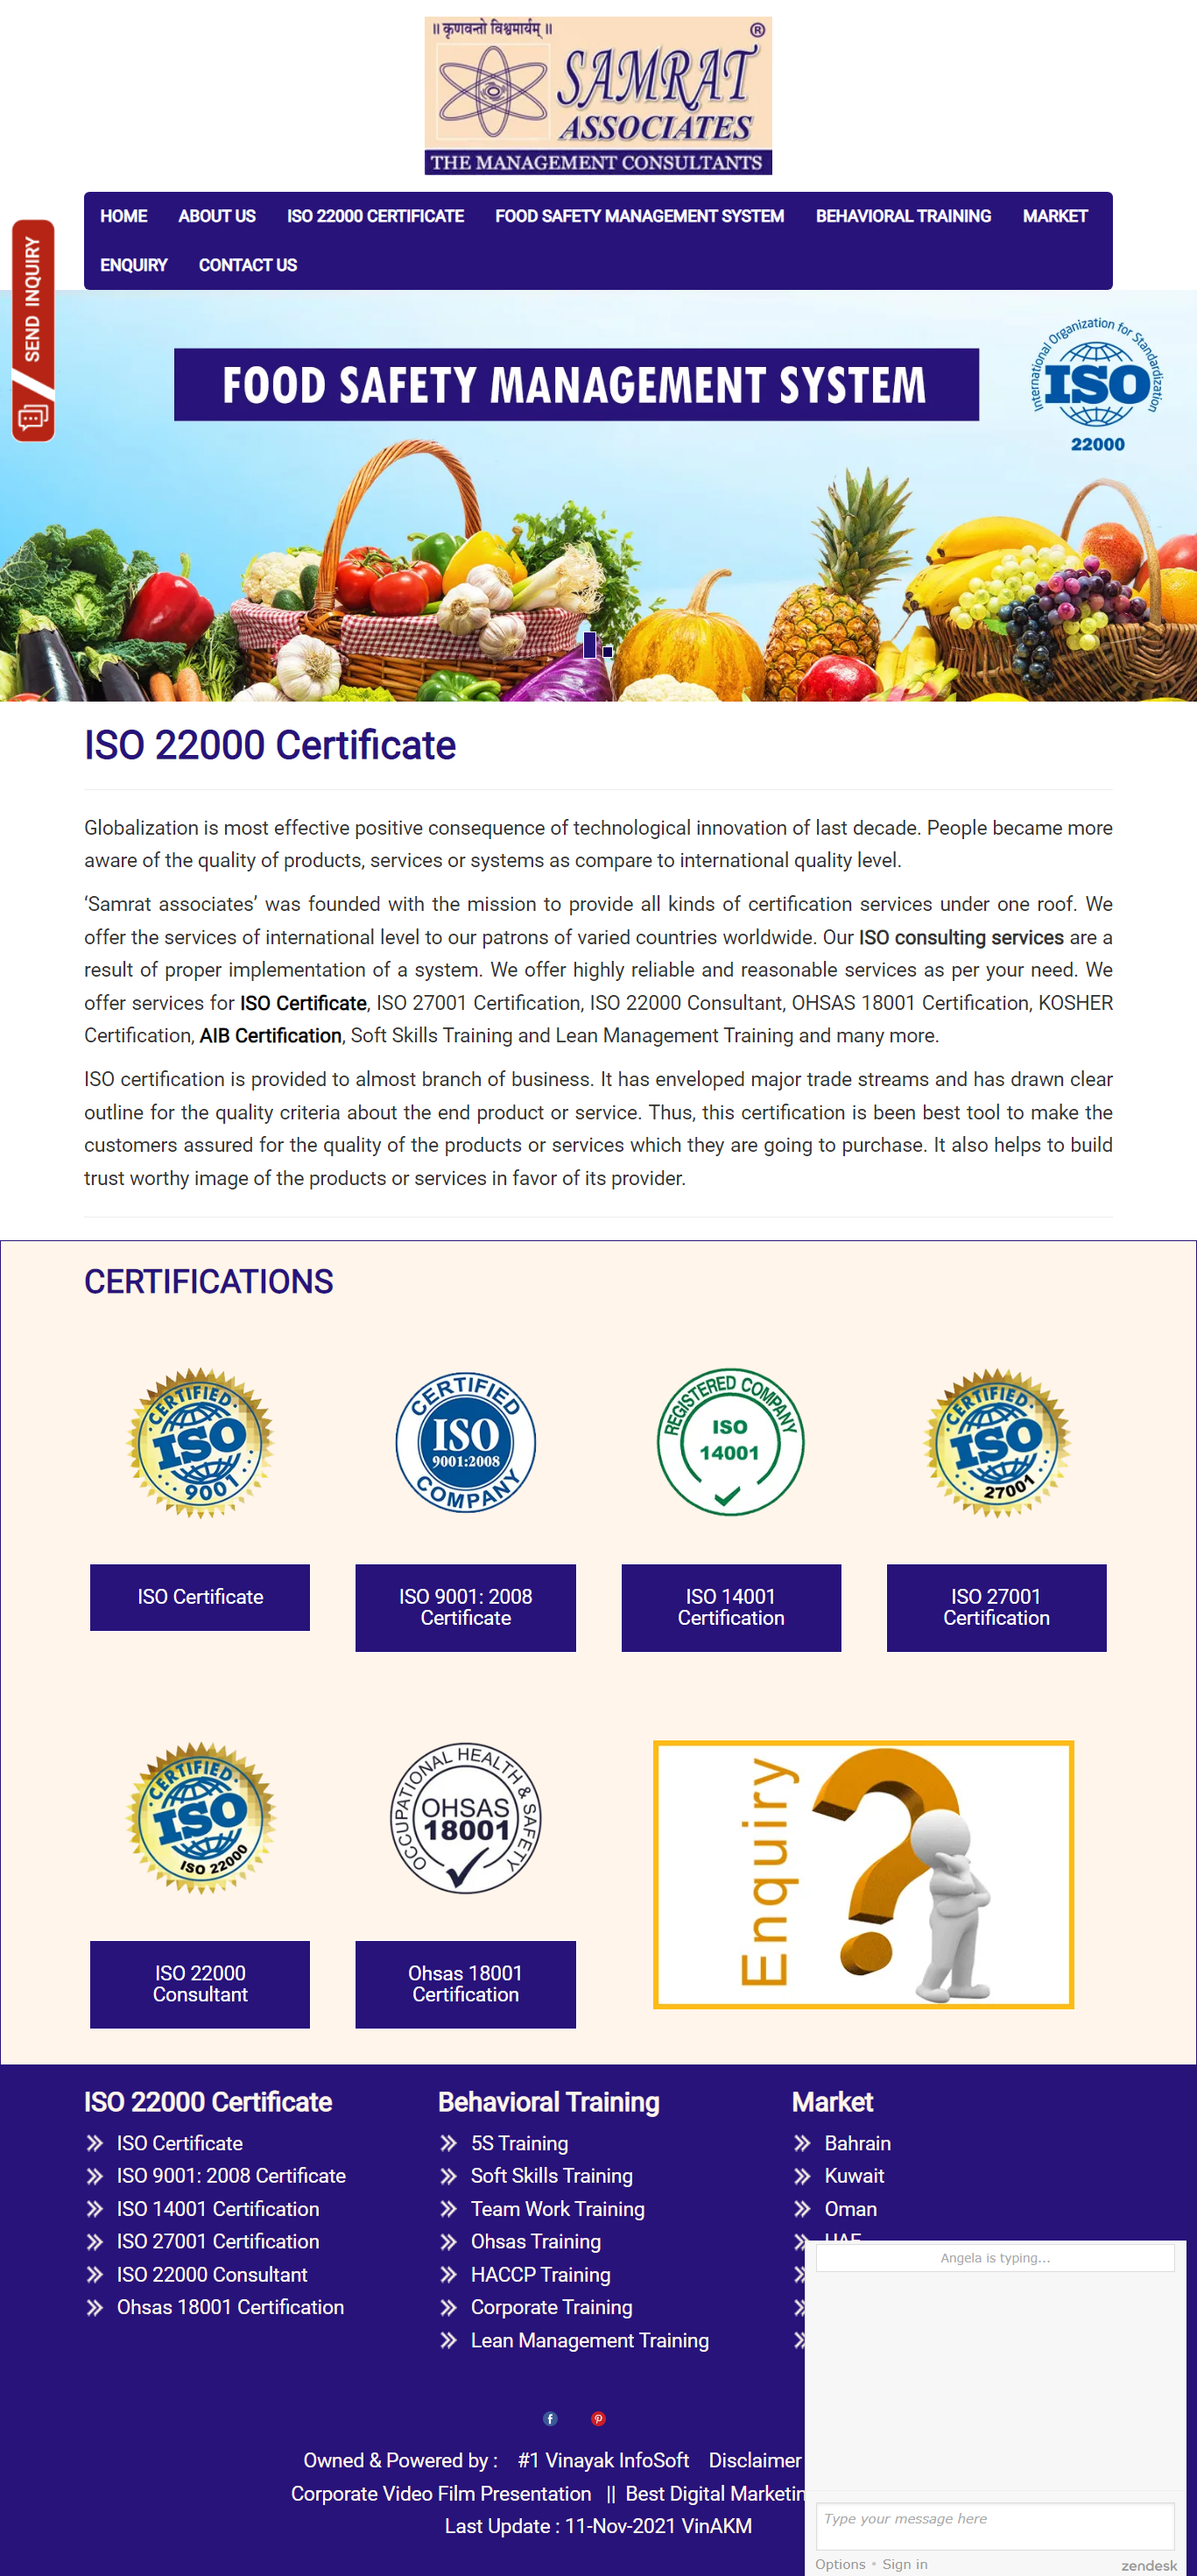 iso22000 Certificate